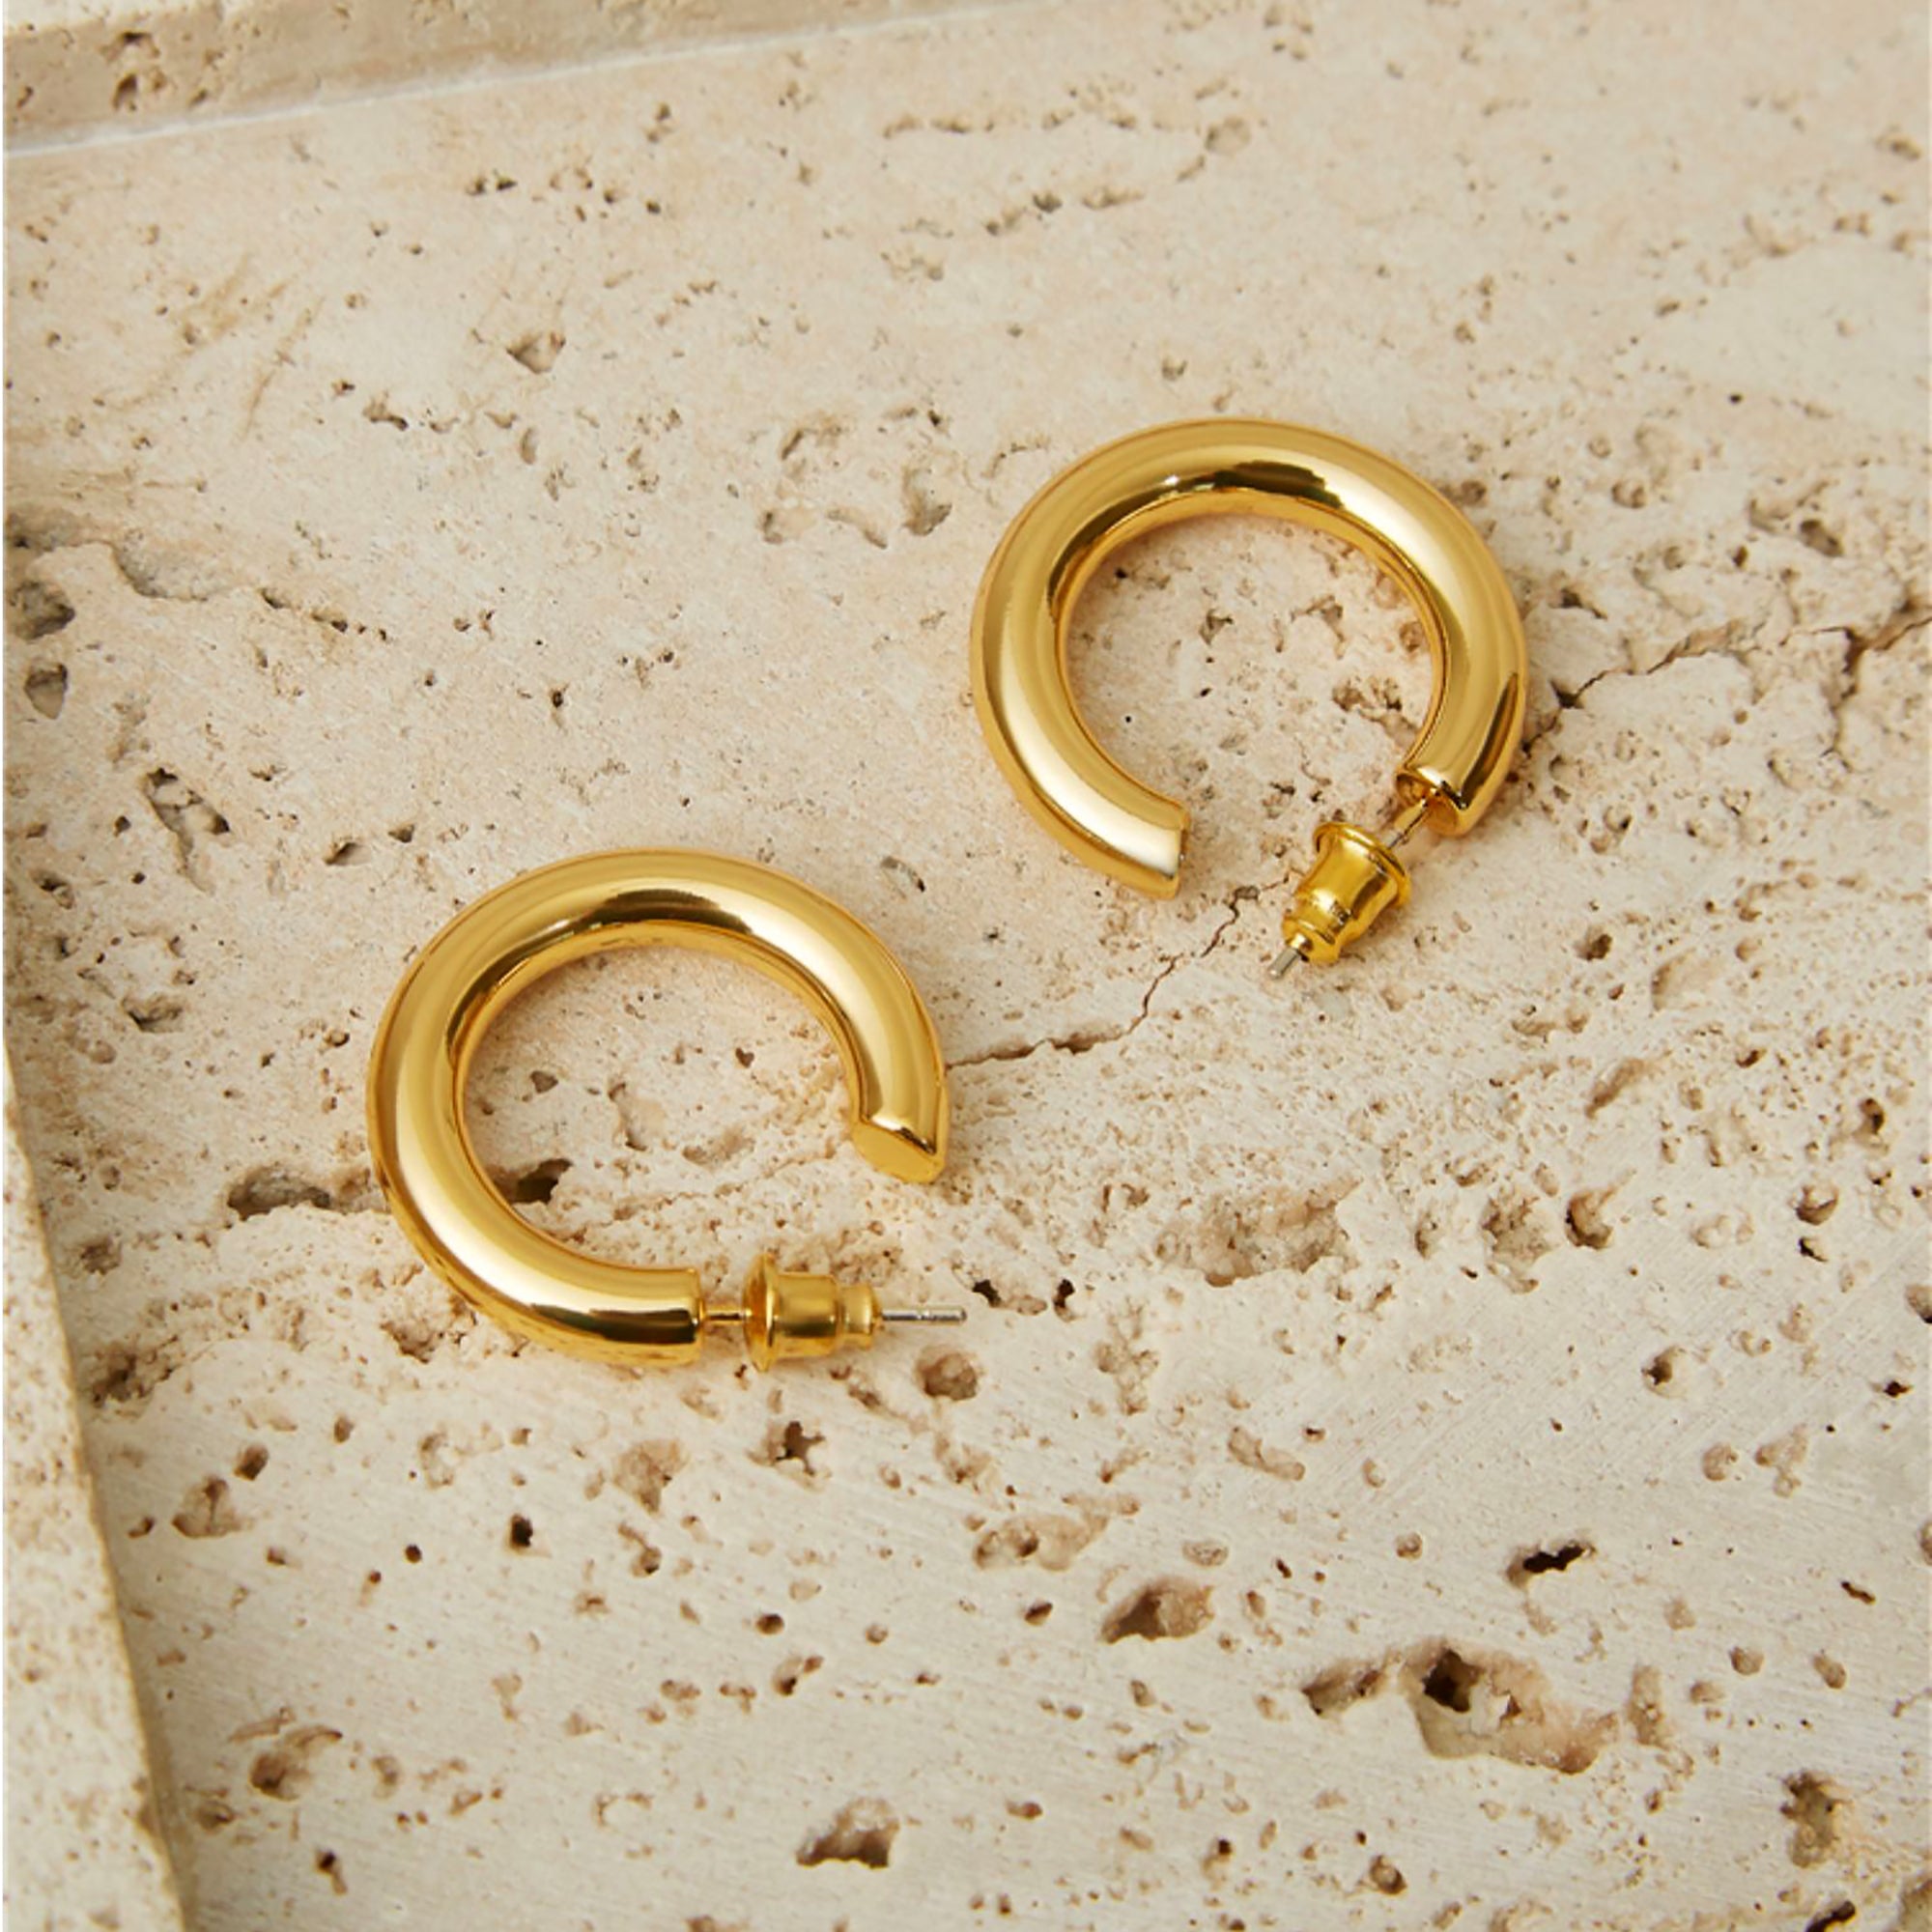 2cm 18K Gold Plated Hoop Earrings Gift wedding influencer styling KOL / Youtuber / Celebrity / Fashion Icon